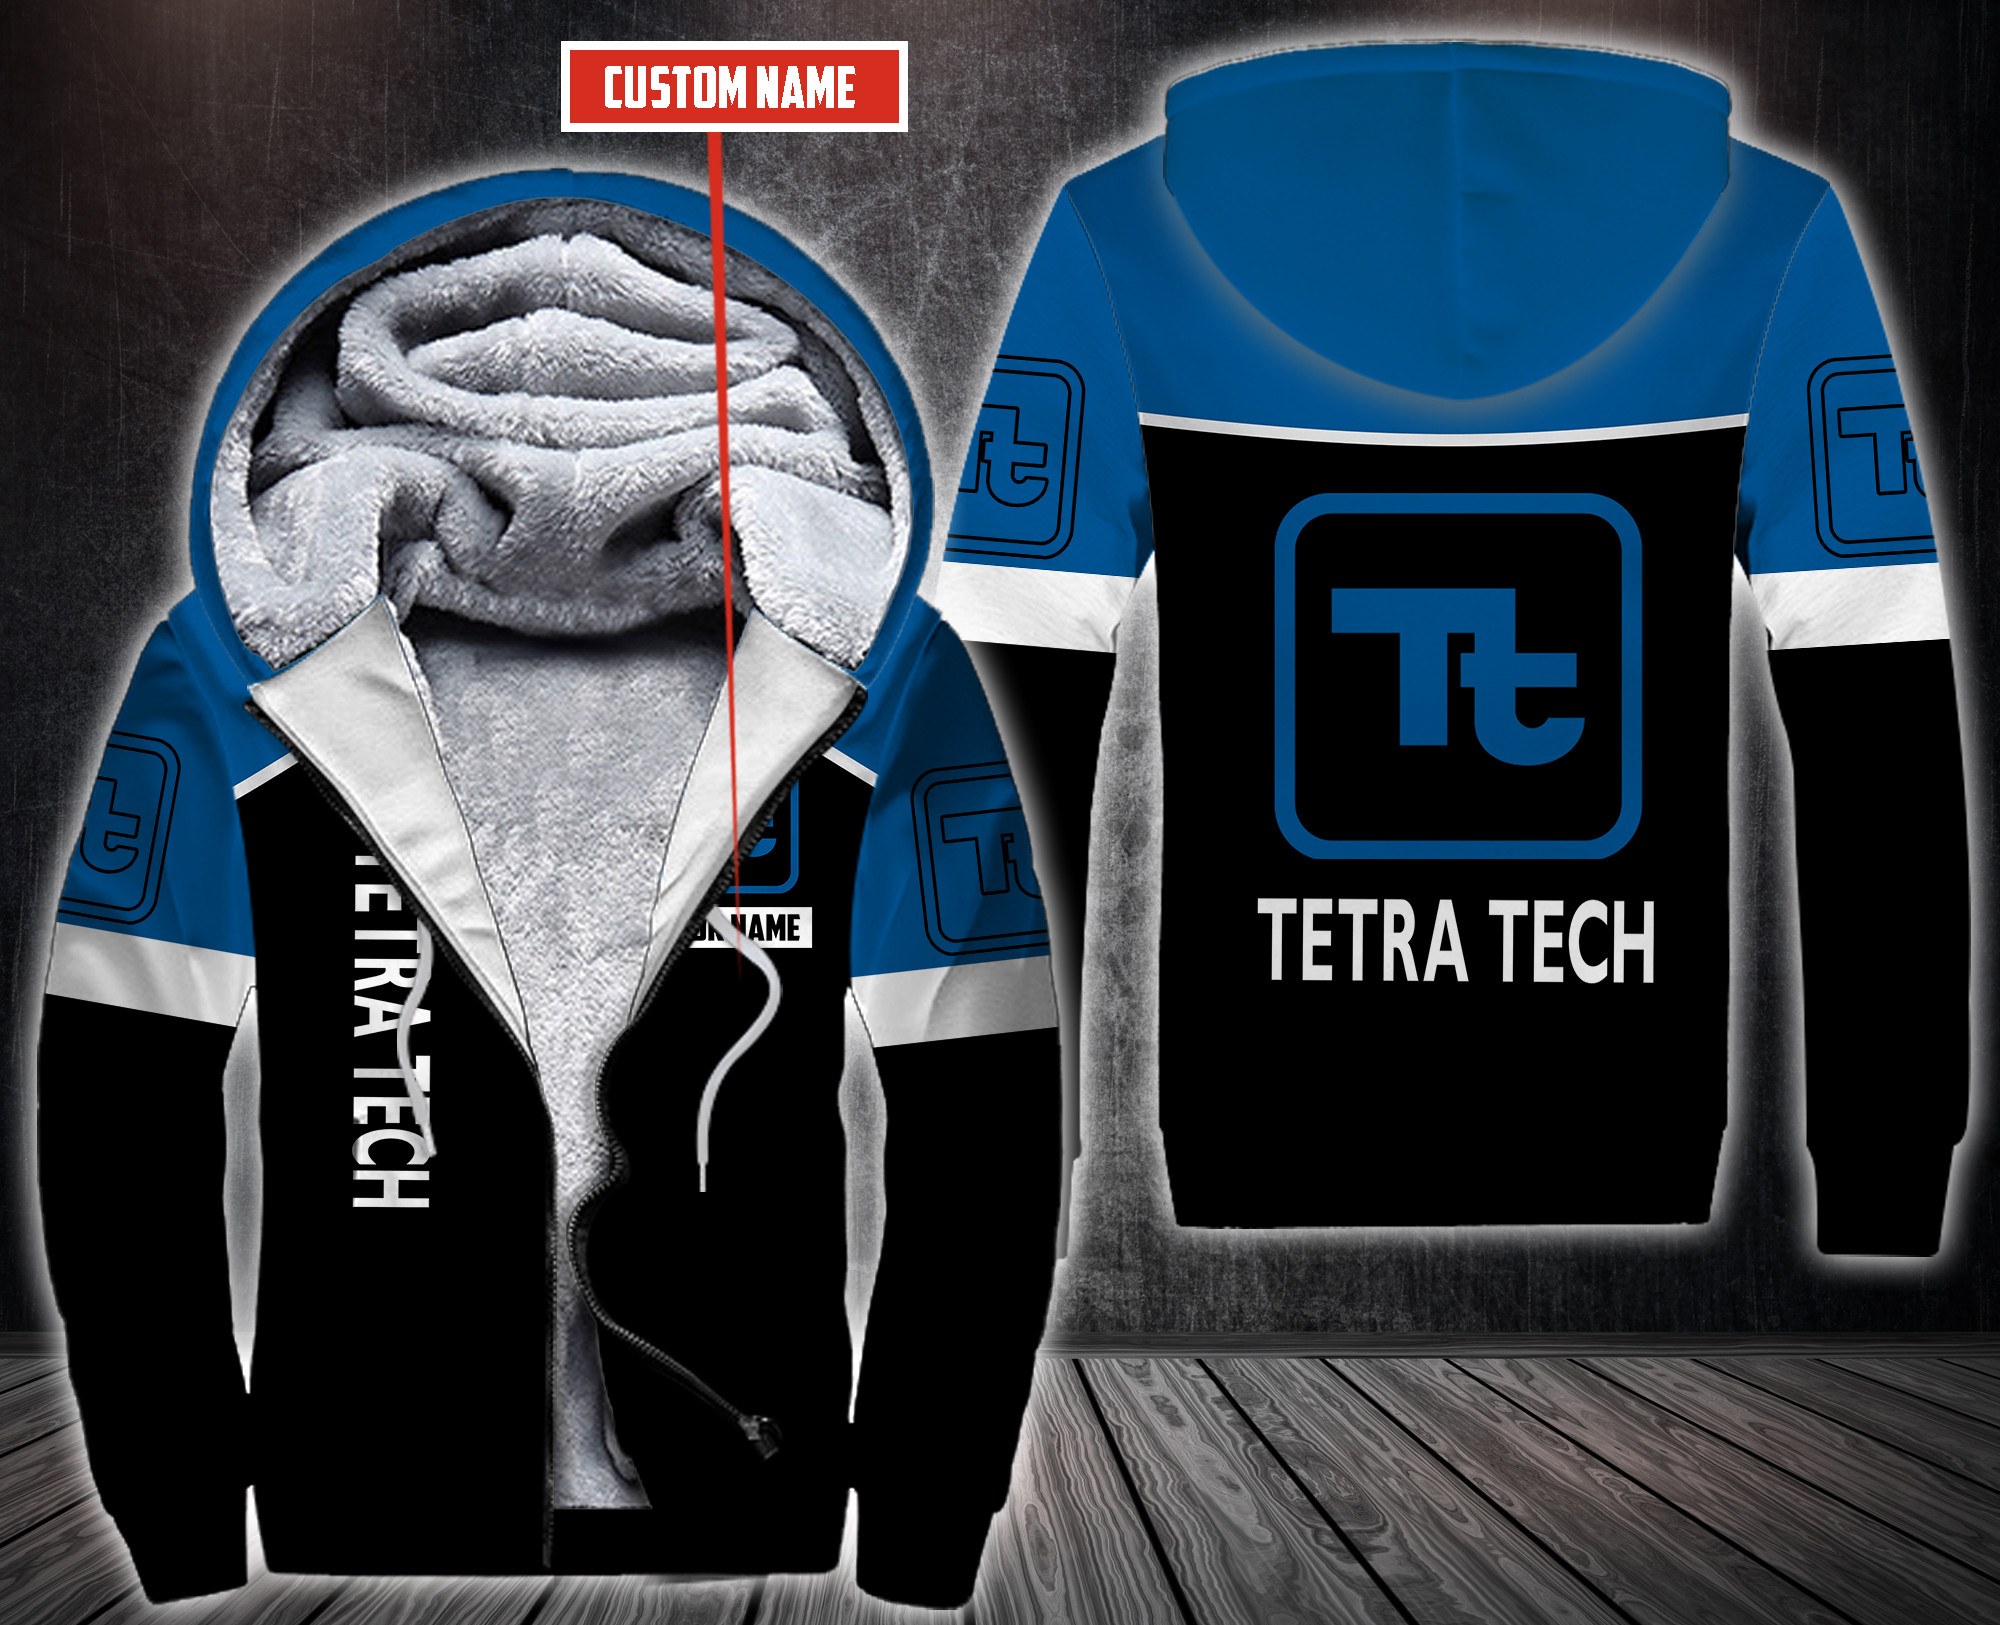 There are also different types of the hoodie for this season 155